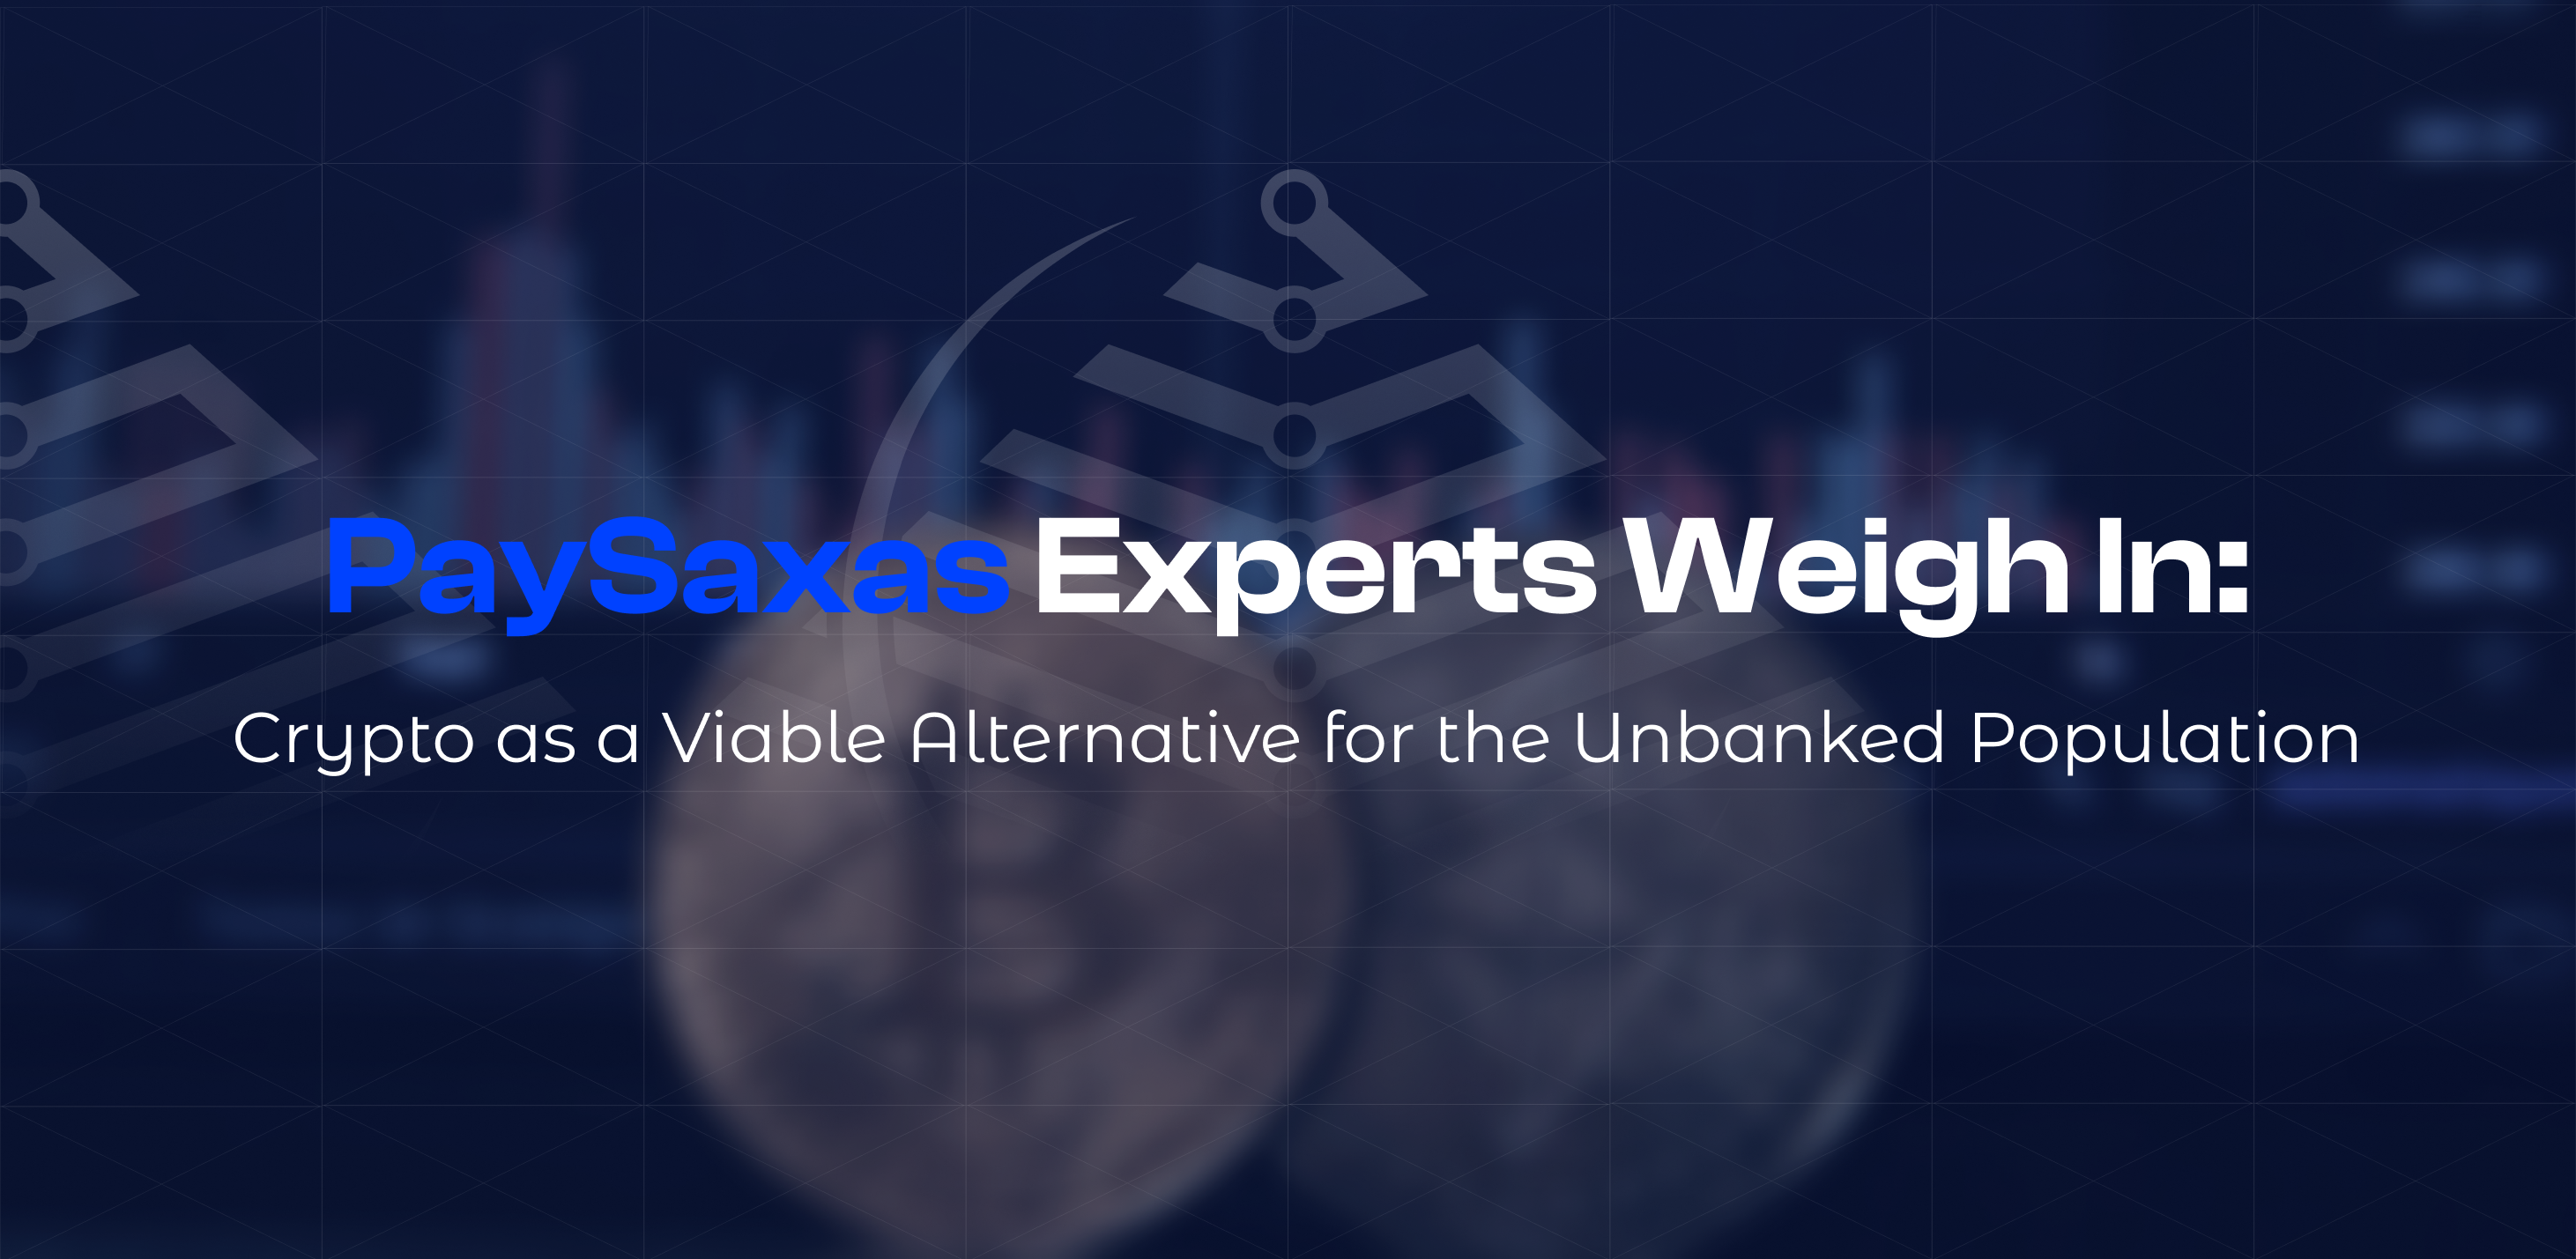 PaySaxas Experts Weigh In: Crypto as a Viable Alternative for the Unbanked Population